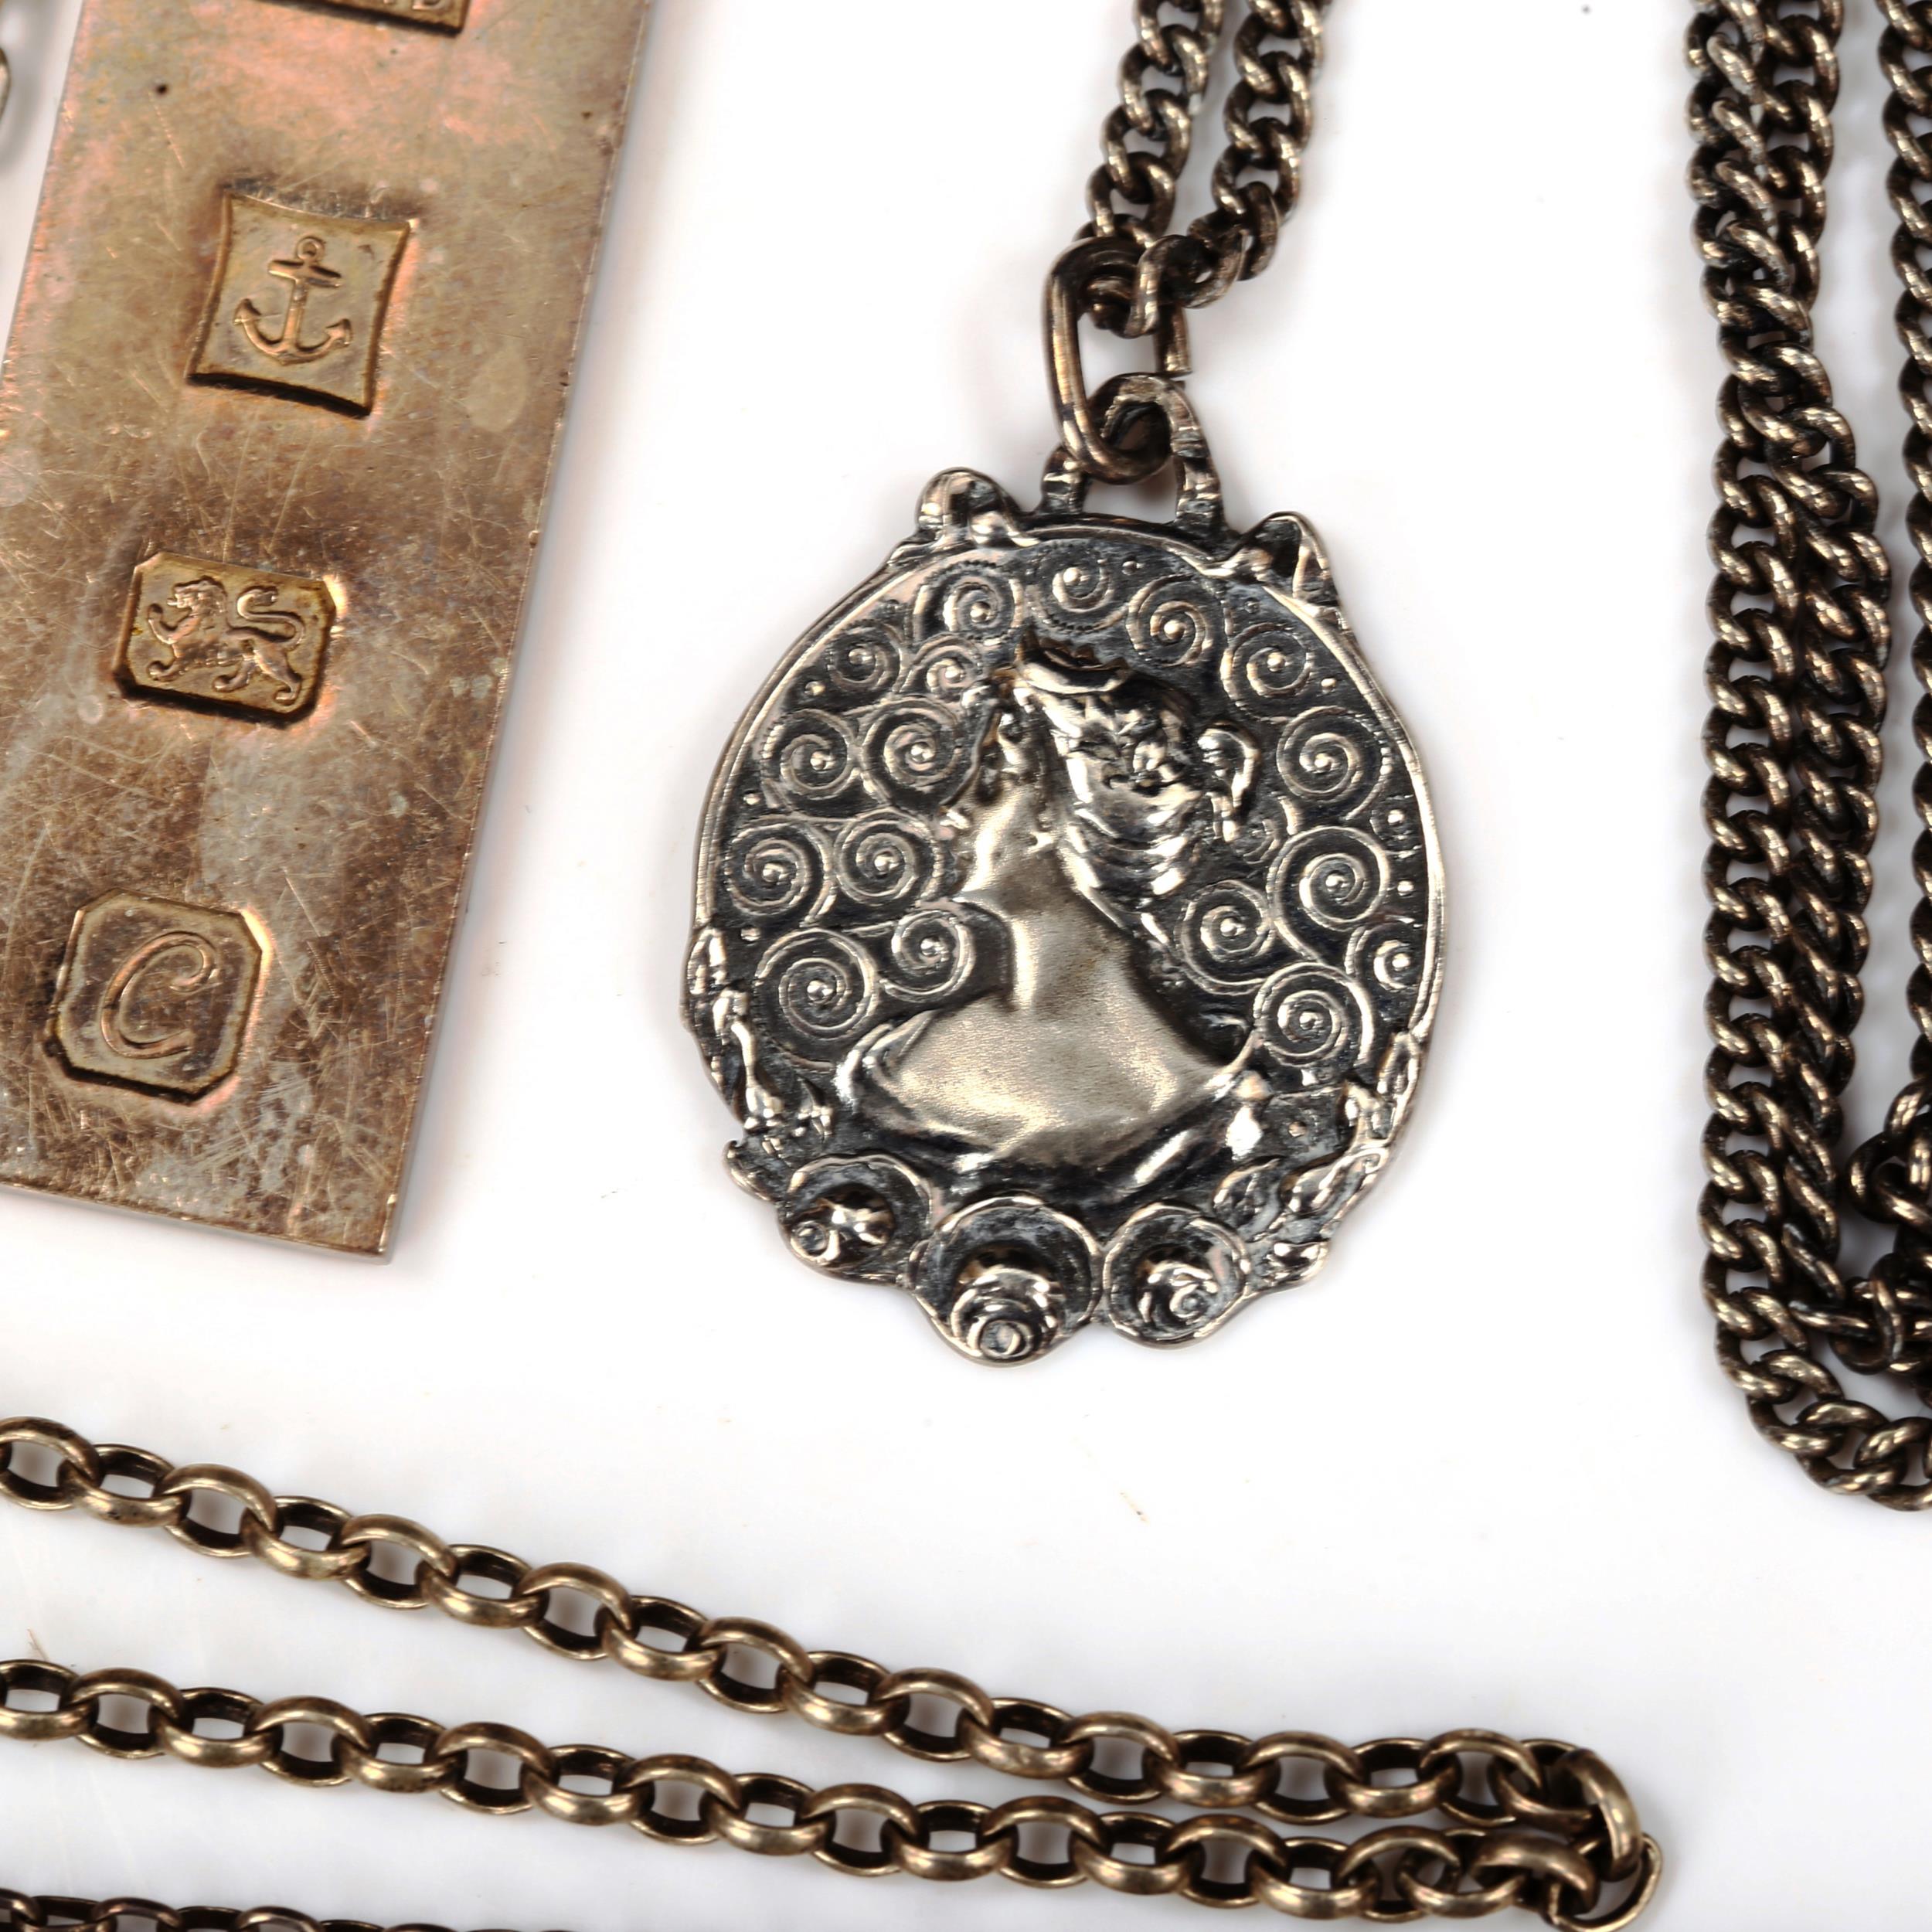 Various silver chains and pendants, including ingot and Art Nouveau, 75.6g total Lot sold as seen - Image 2 of 4